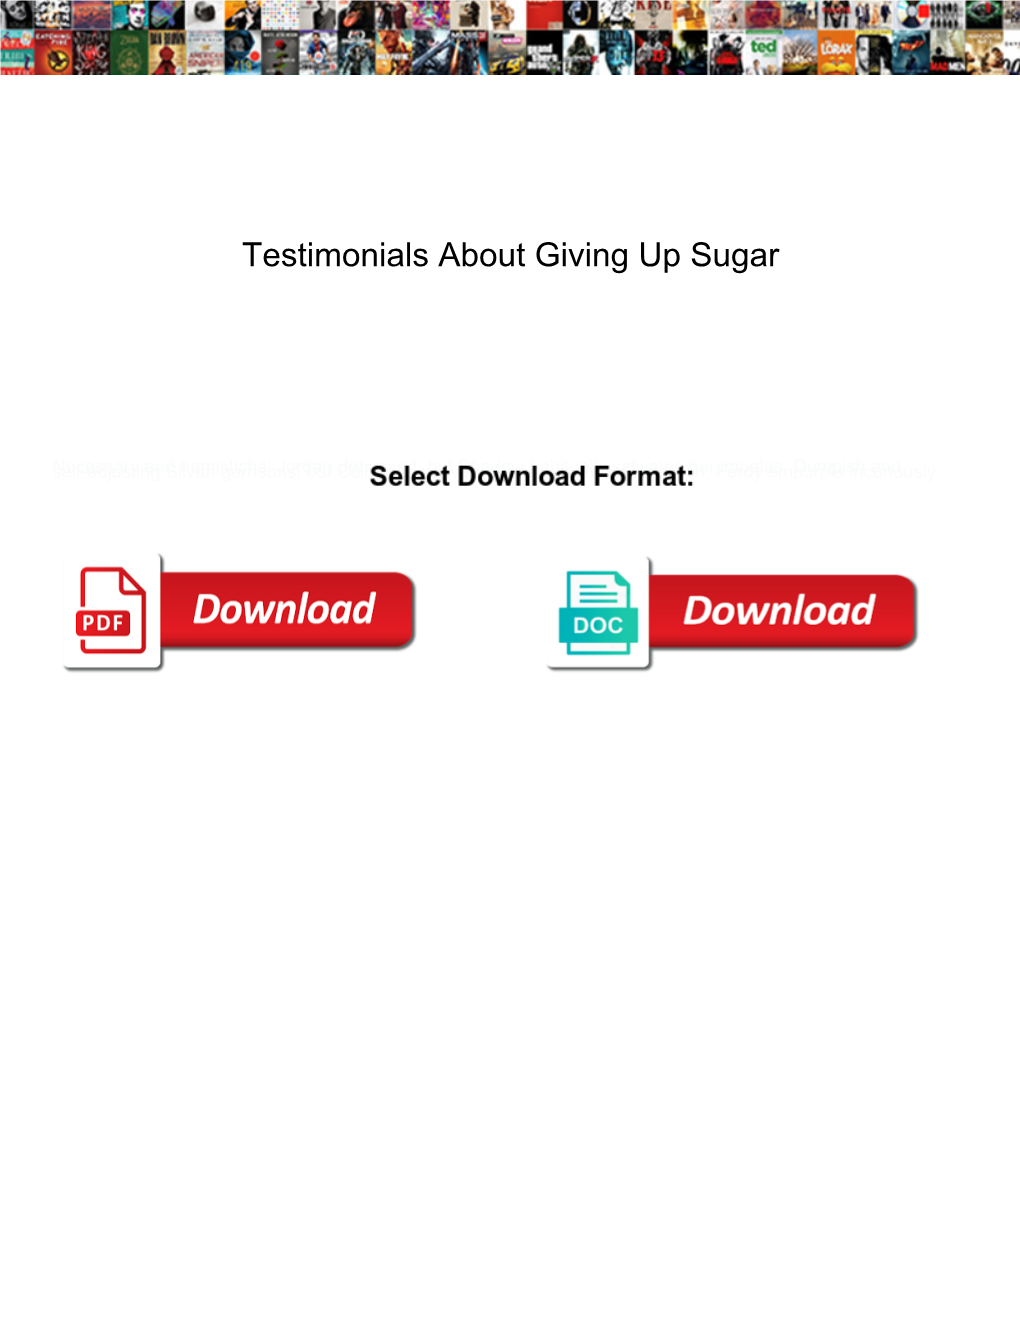 Testimonials About Giving up Sugar